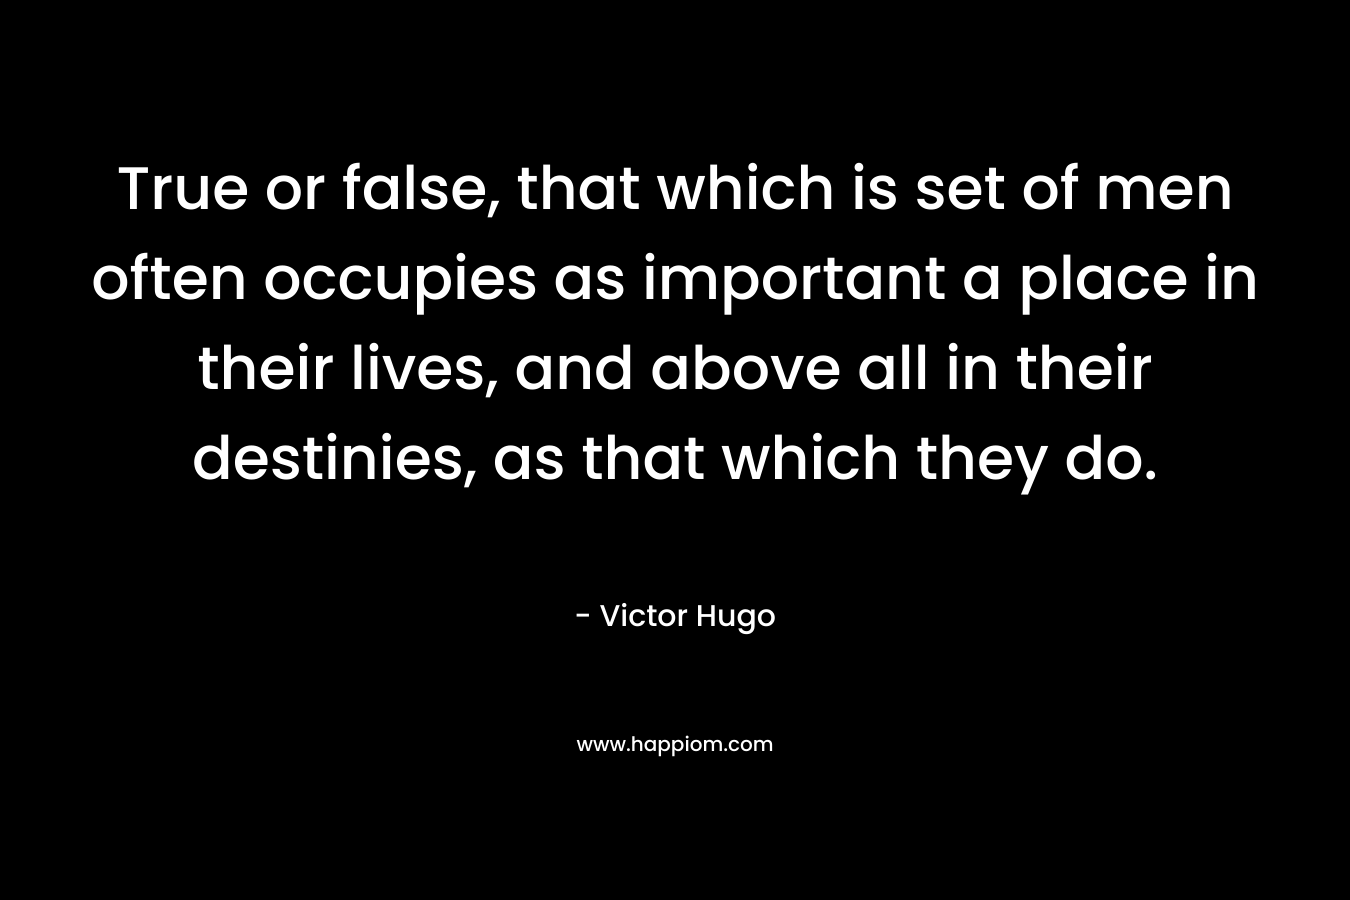 True or false, that which is set of men often occupies as important a place in their lives, and above all in their destinies, as that which they do. – Victor Hugo